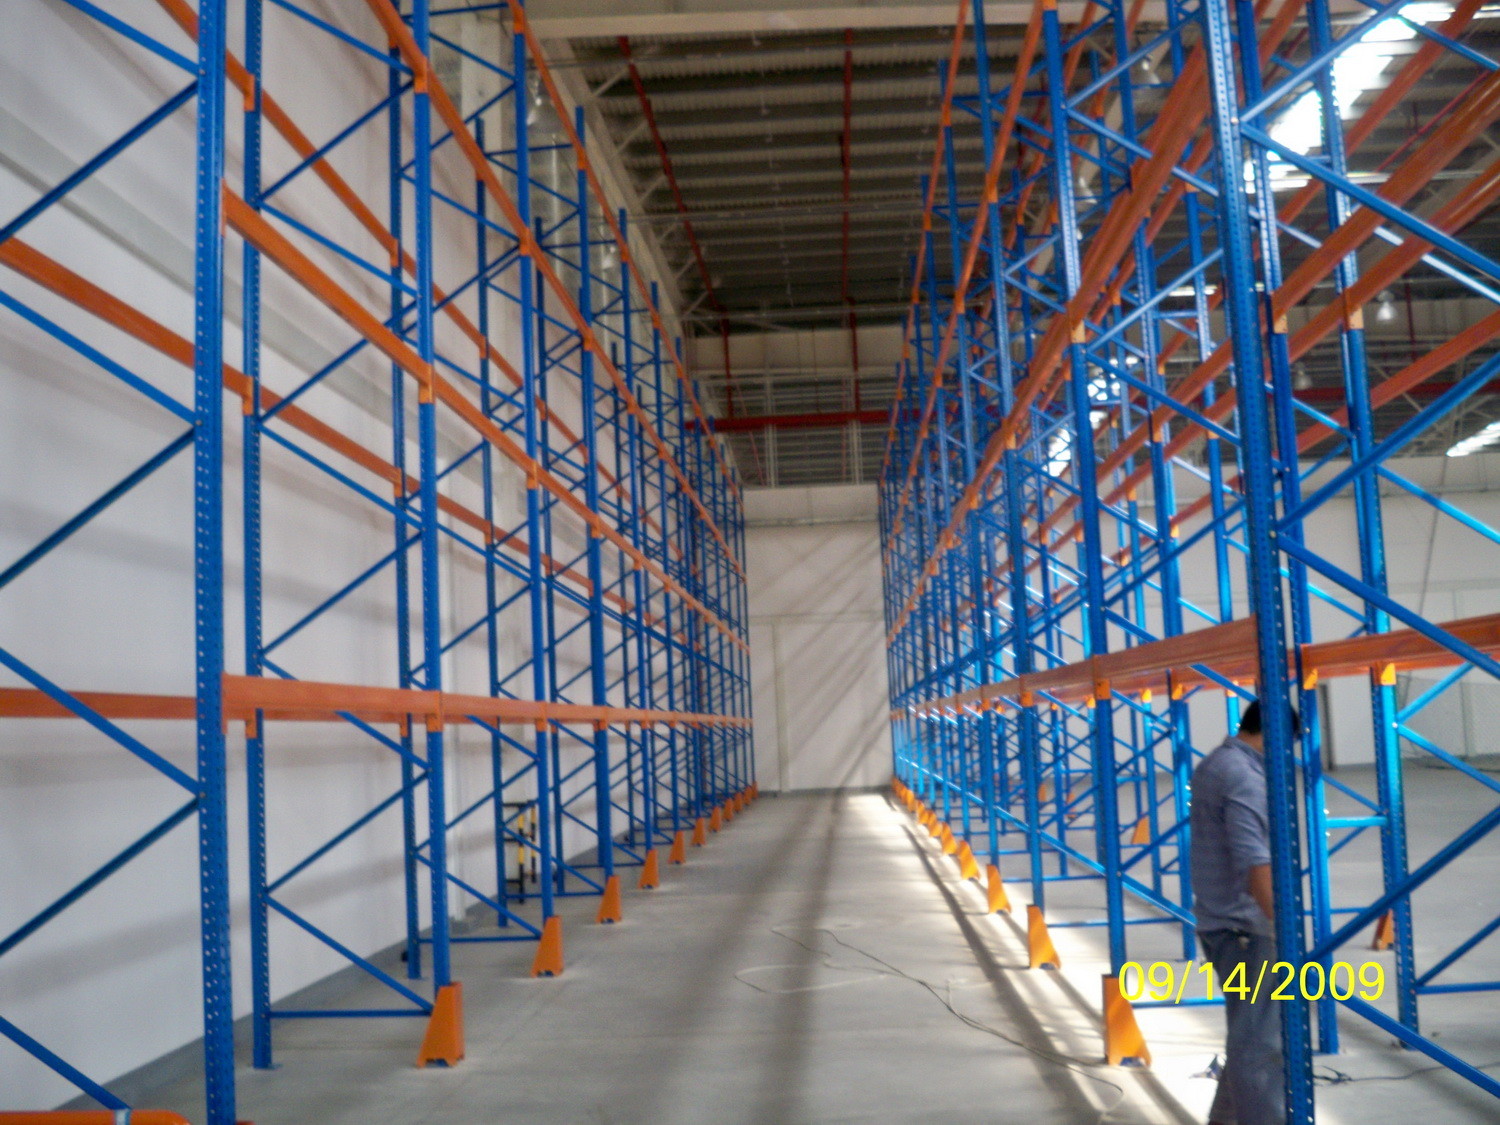 China Cold Rolled Steel Racking Pallet Rack Shelving , Industrail Storage Solutions factory